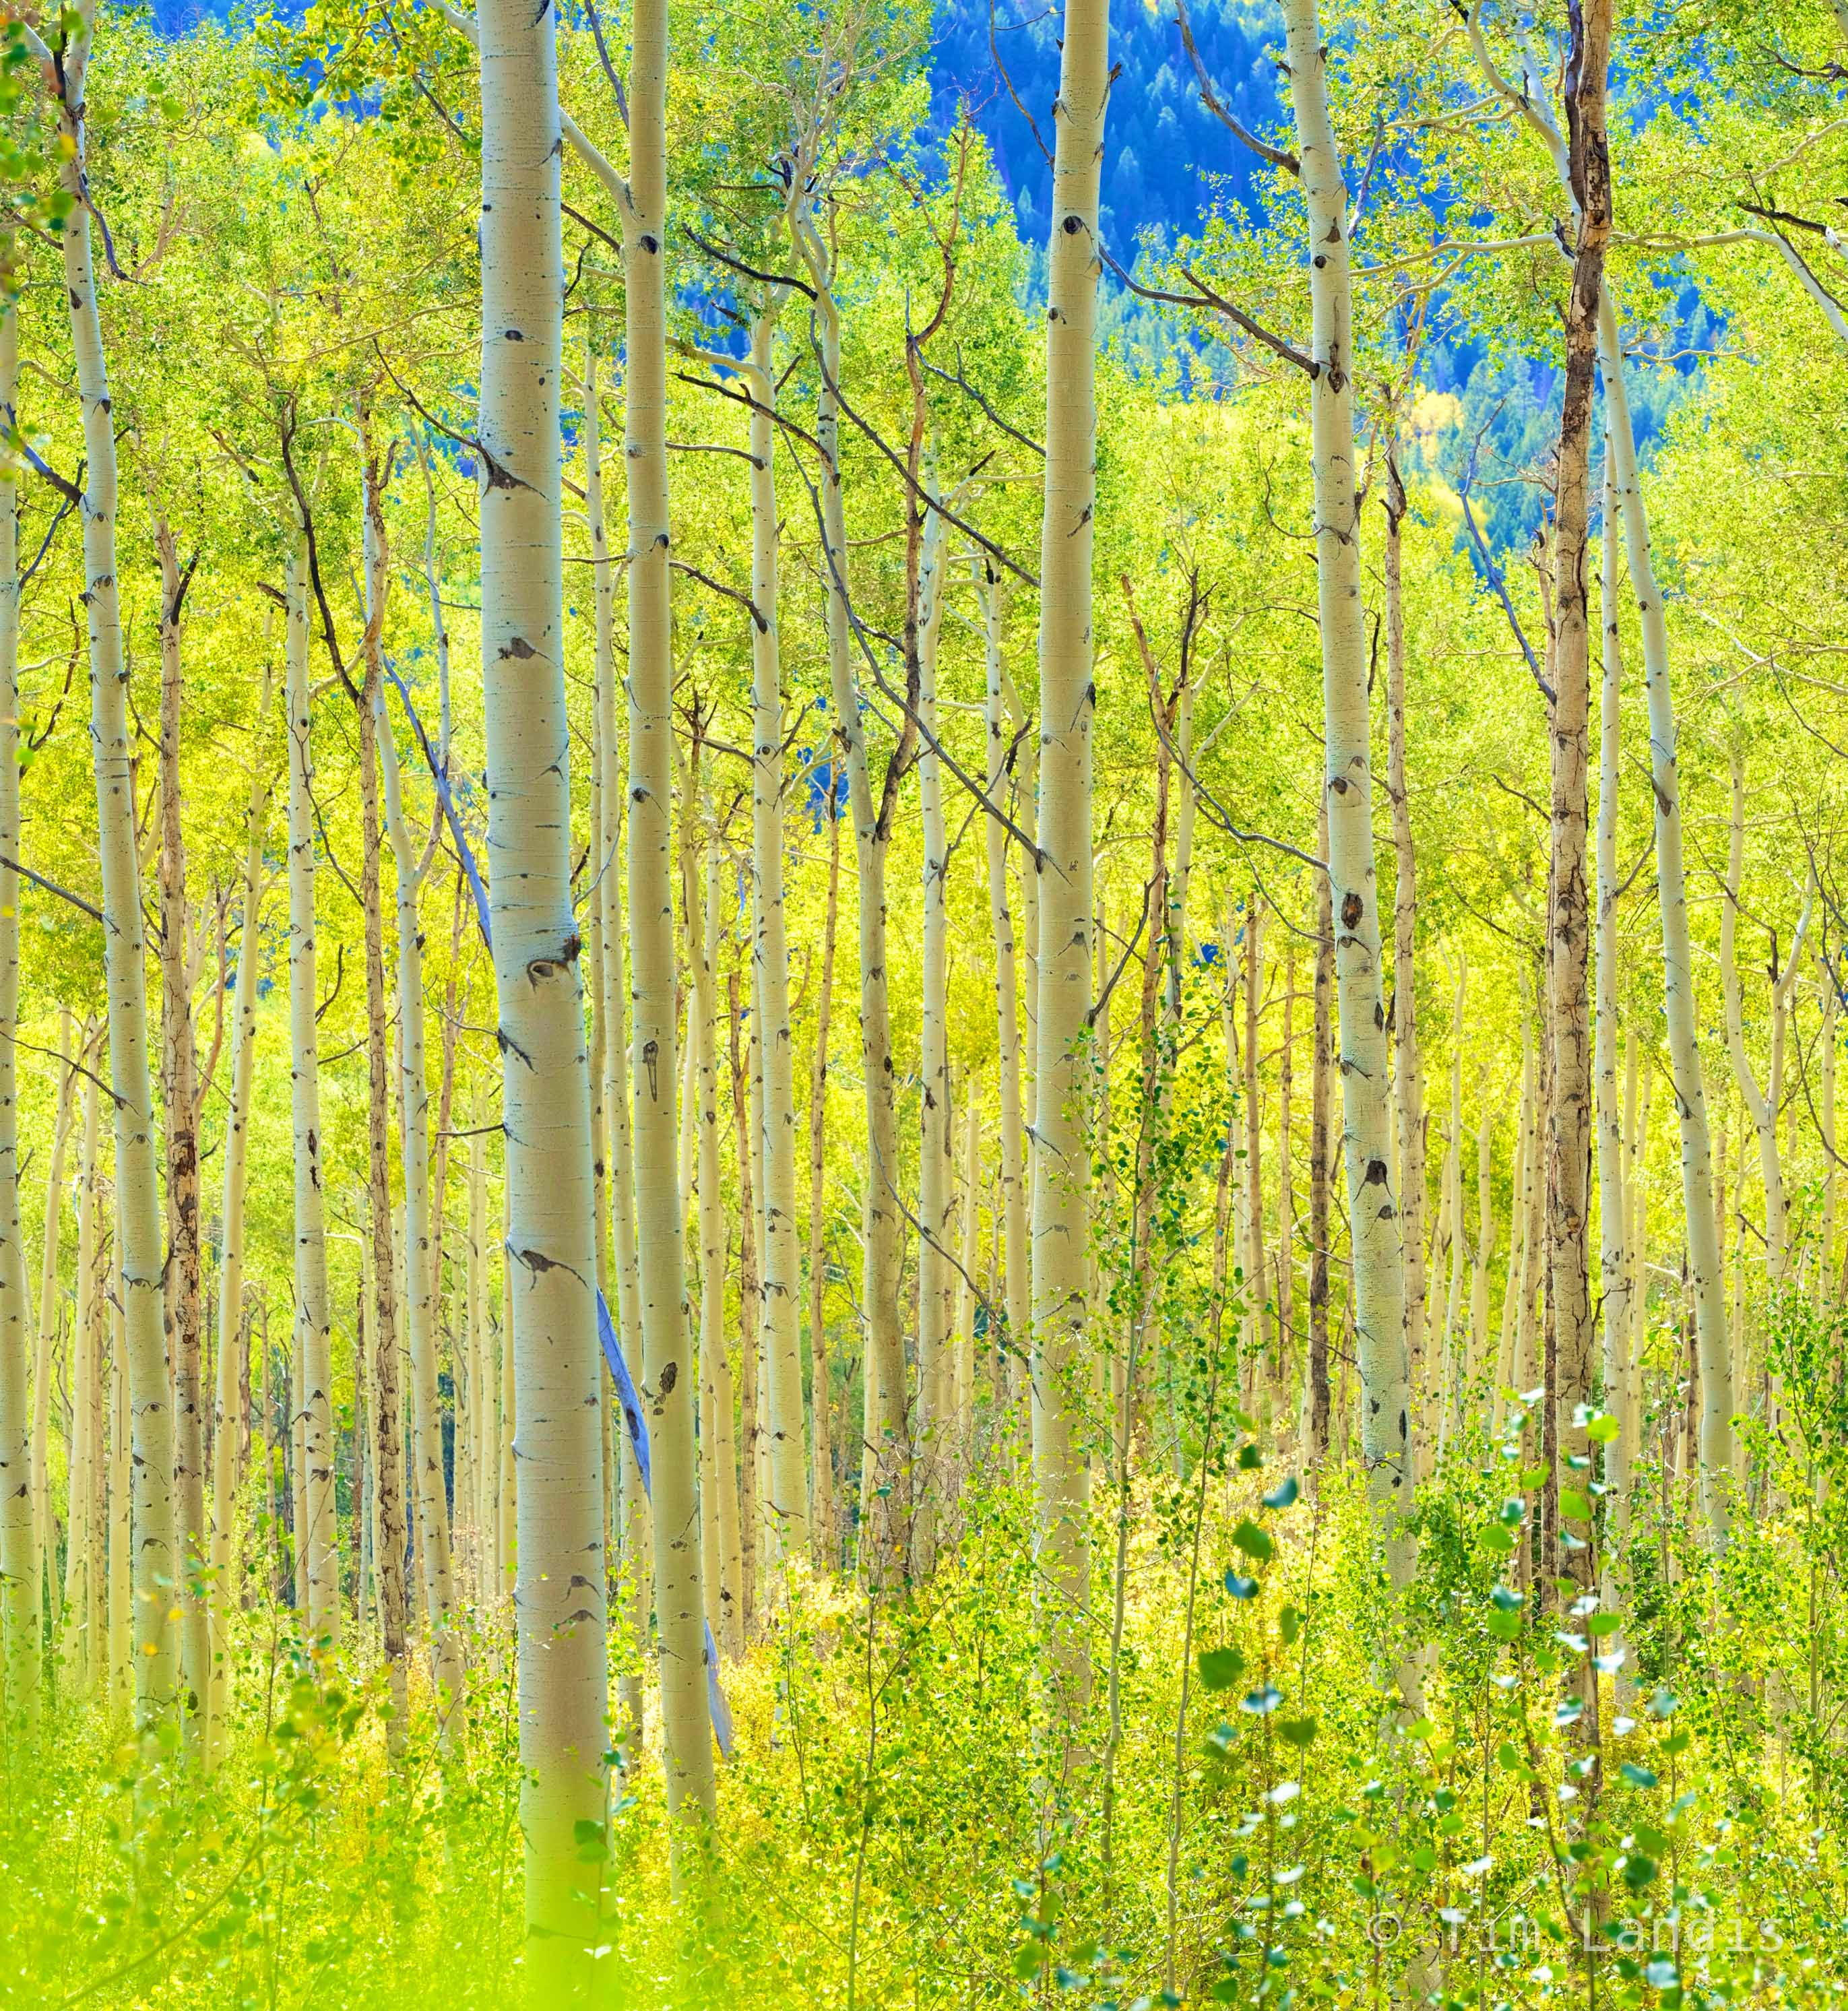 Aspen grove of green to gold